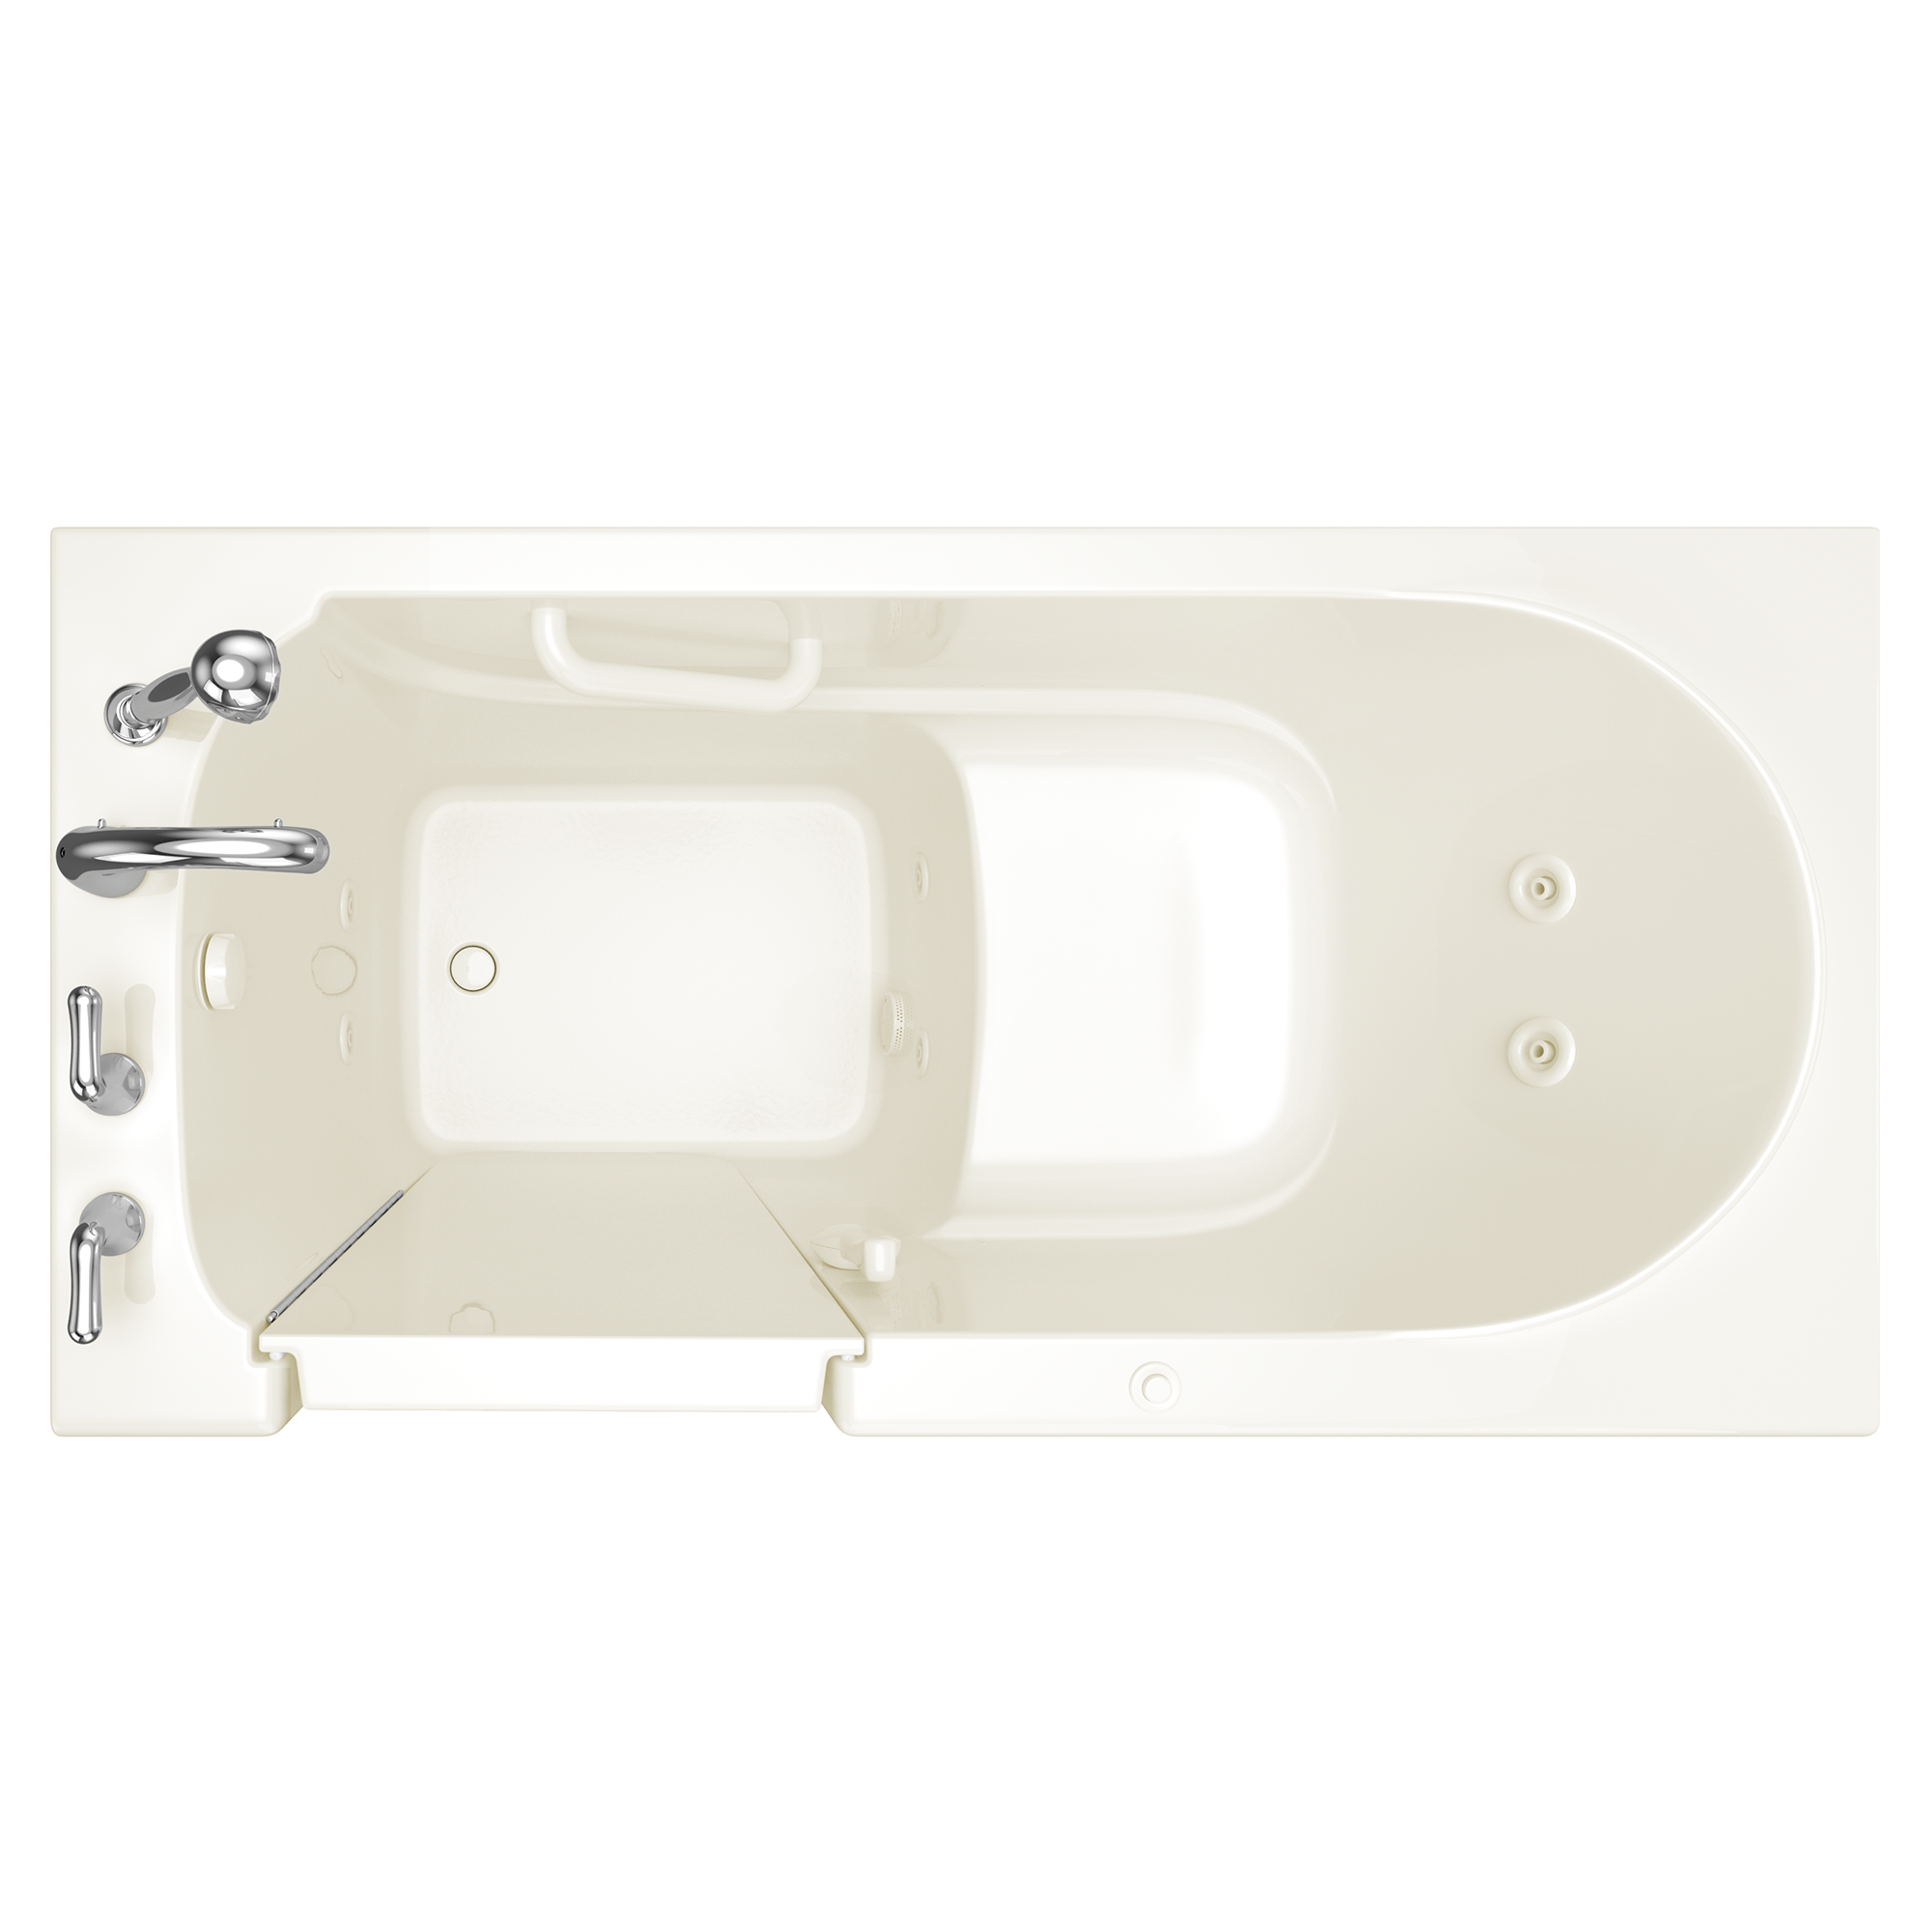 Gelcoat Entry Series 60 x 30 Inch Walk In Tub With Whirlpool System - Left Hand Drain With Faucet ST BISCUIT